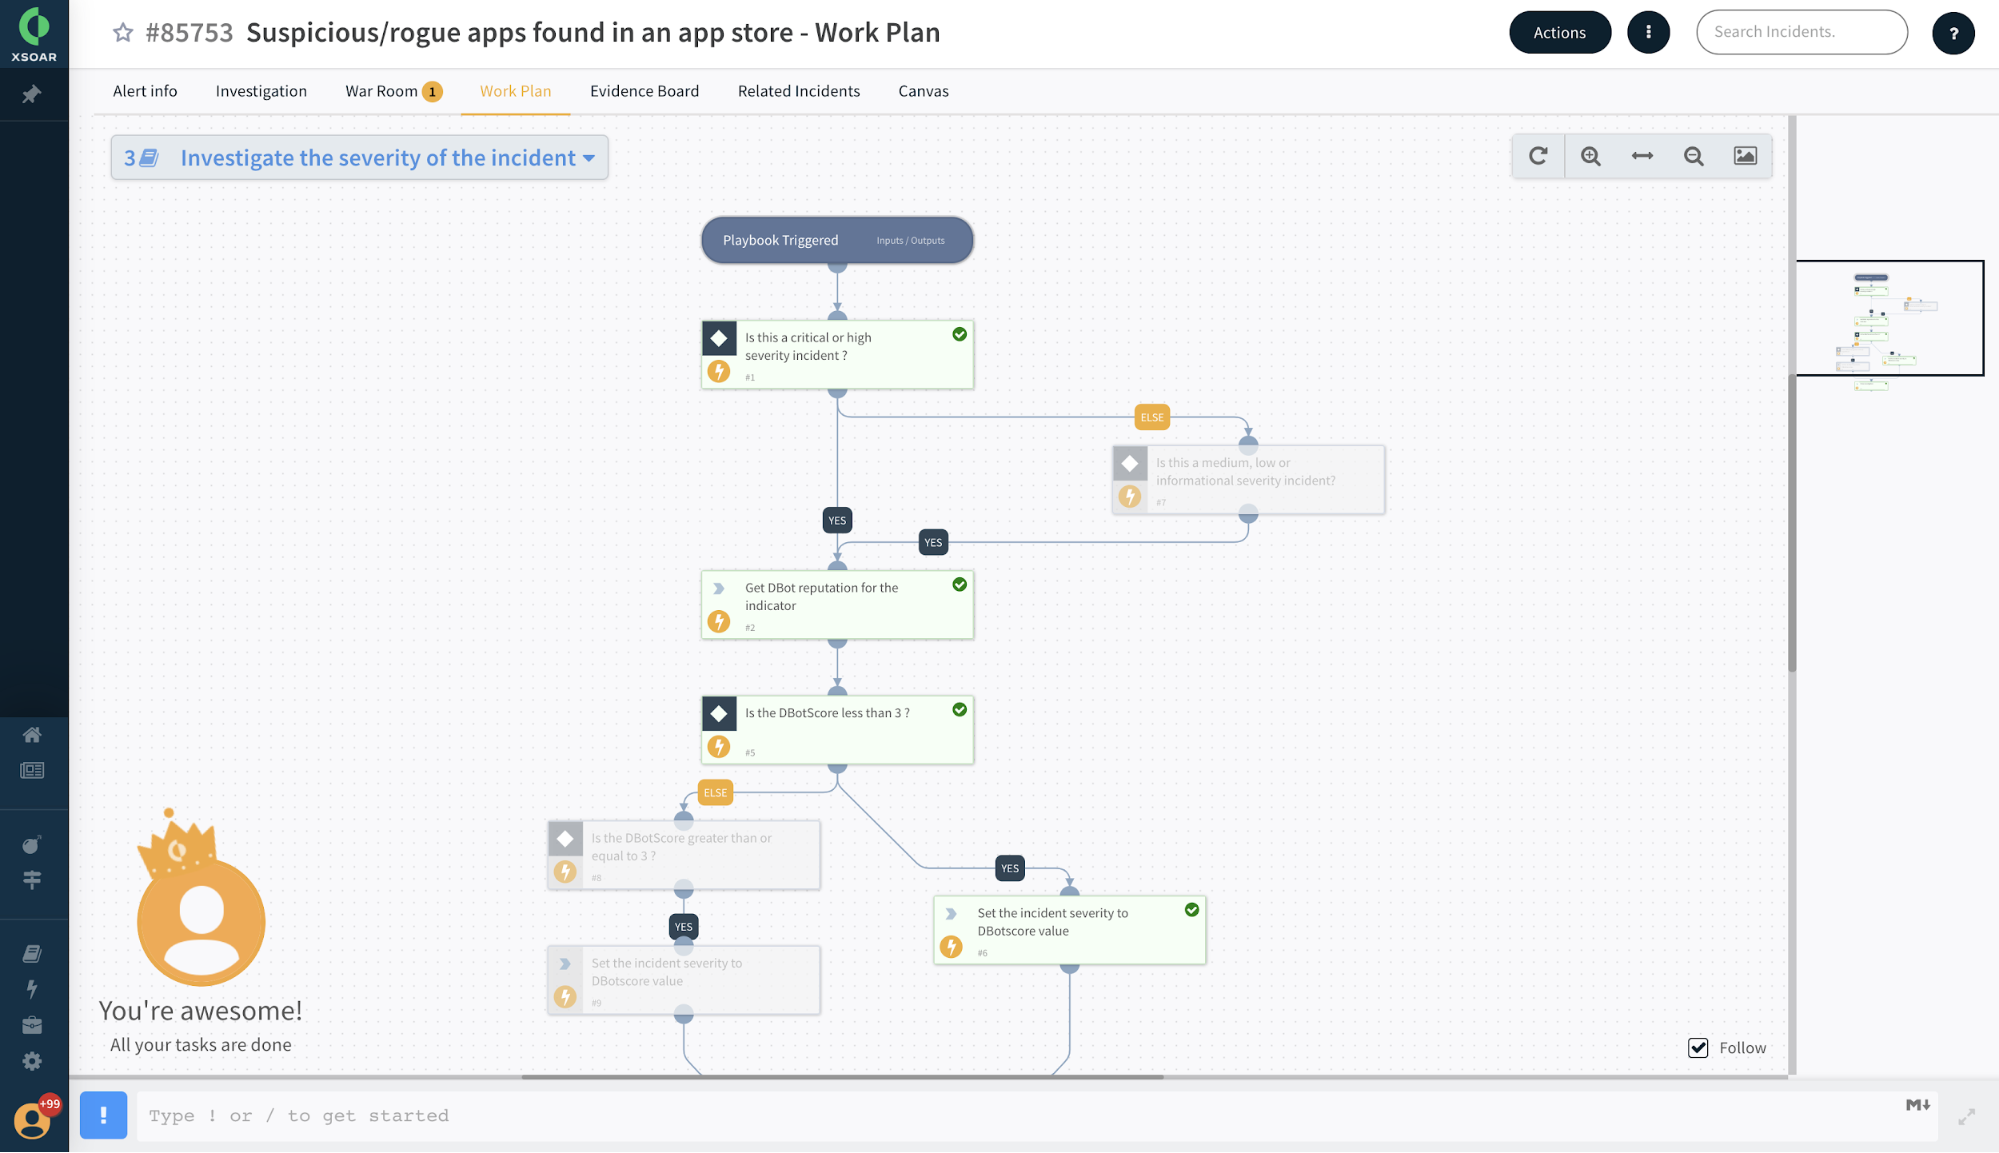 This screenshot shows an example of a Work Plan in Cortex XSOAR, focused in this case on Suspicious/rogue apps found in an app store. 